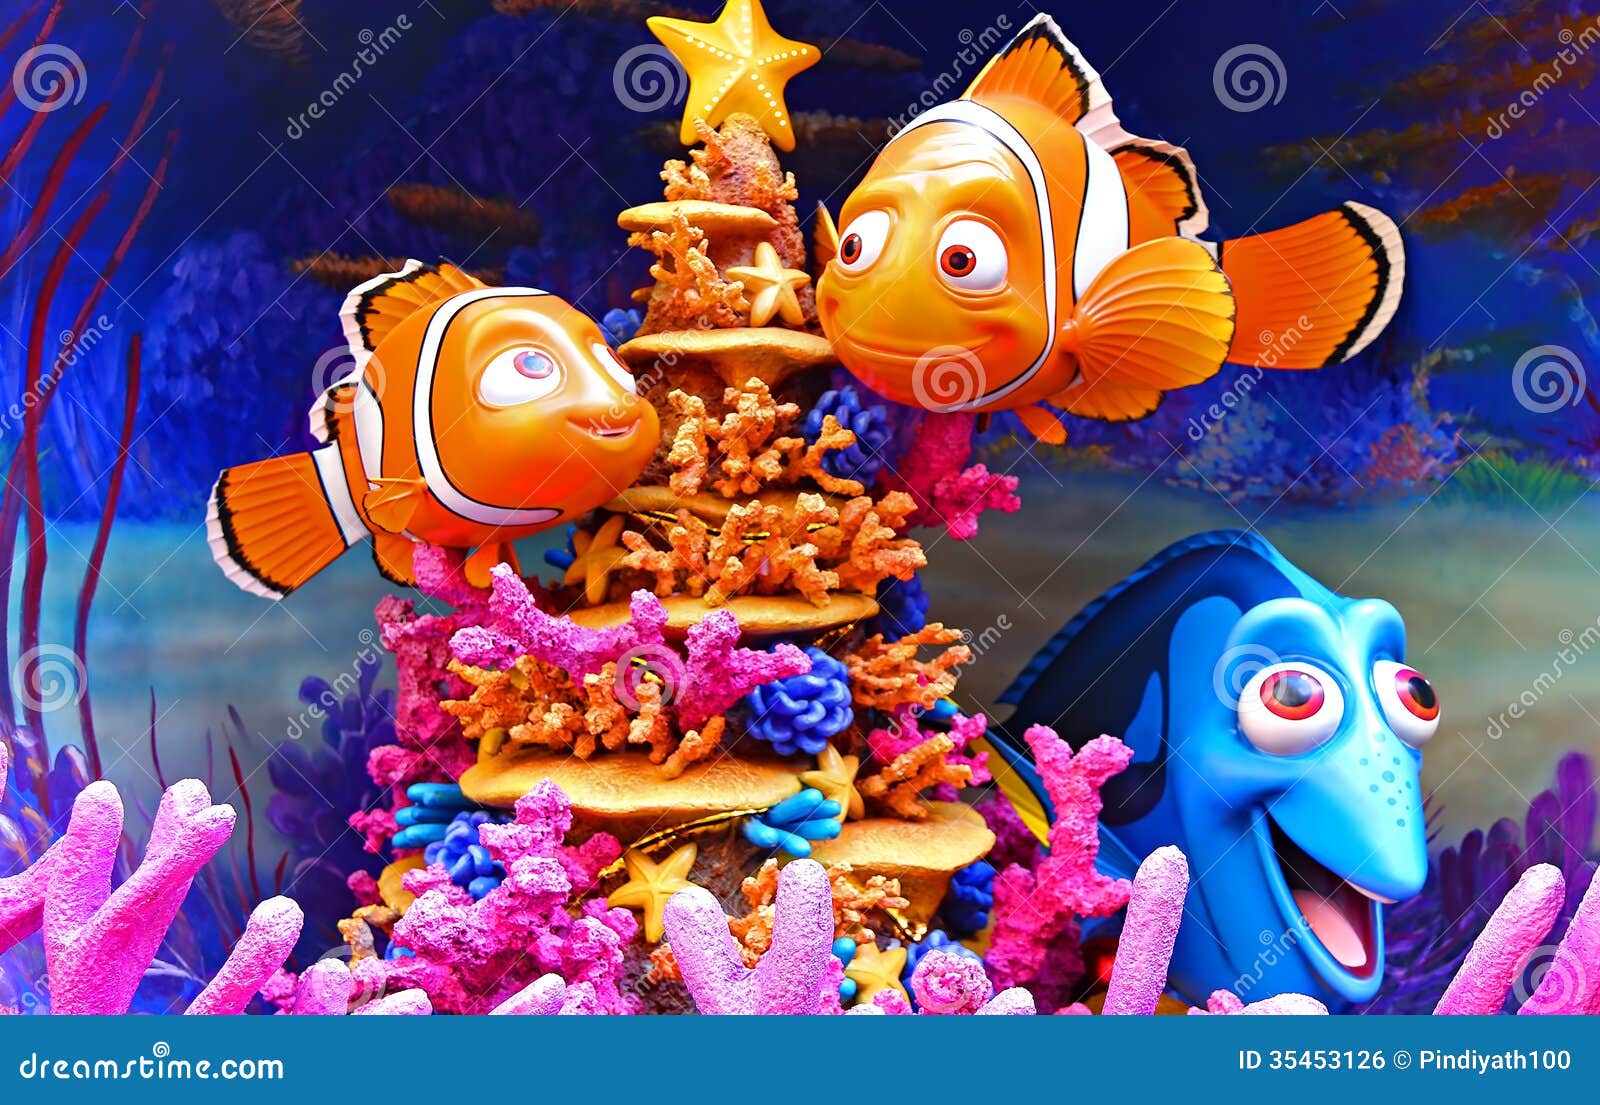 Disney Finding Nemo Characters Editorial Photo - Image of cartoon, cute:  35453126